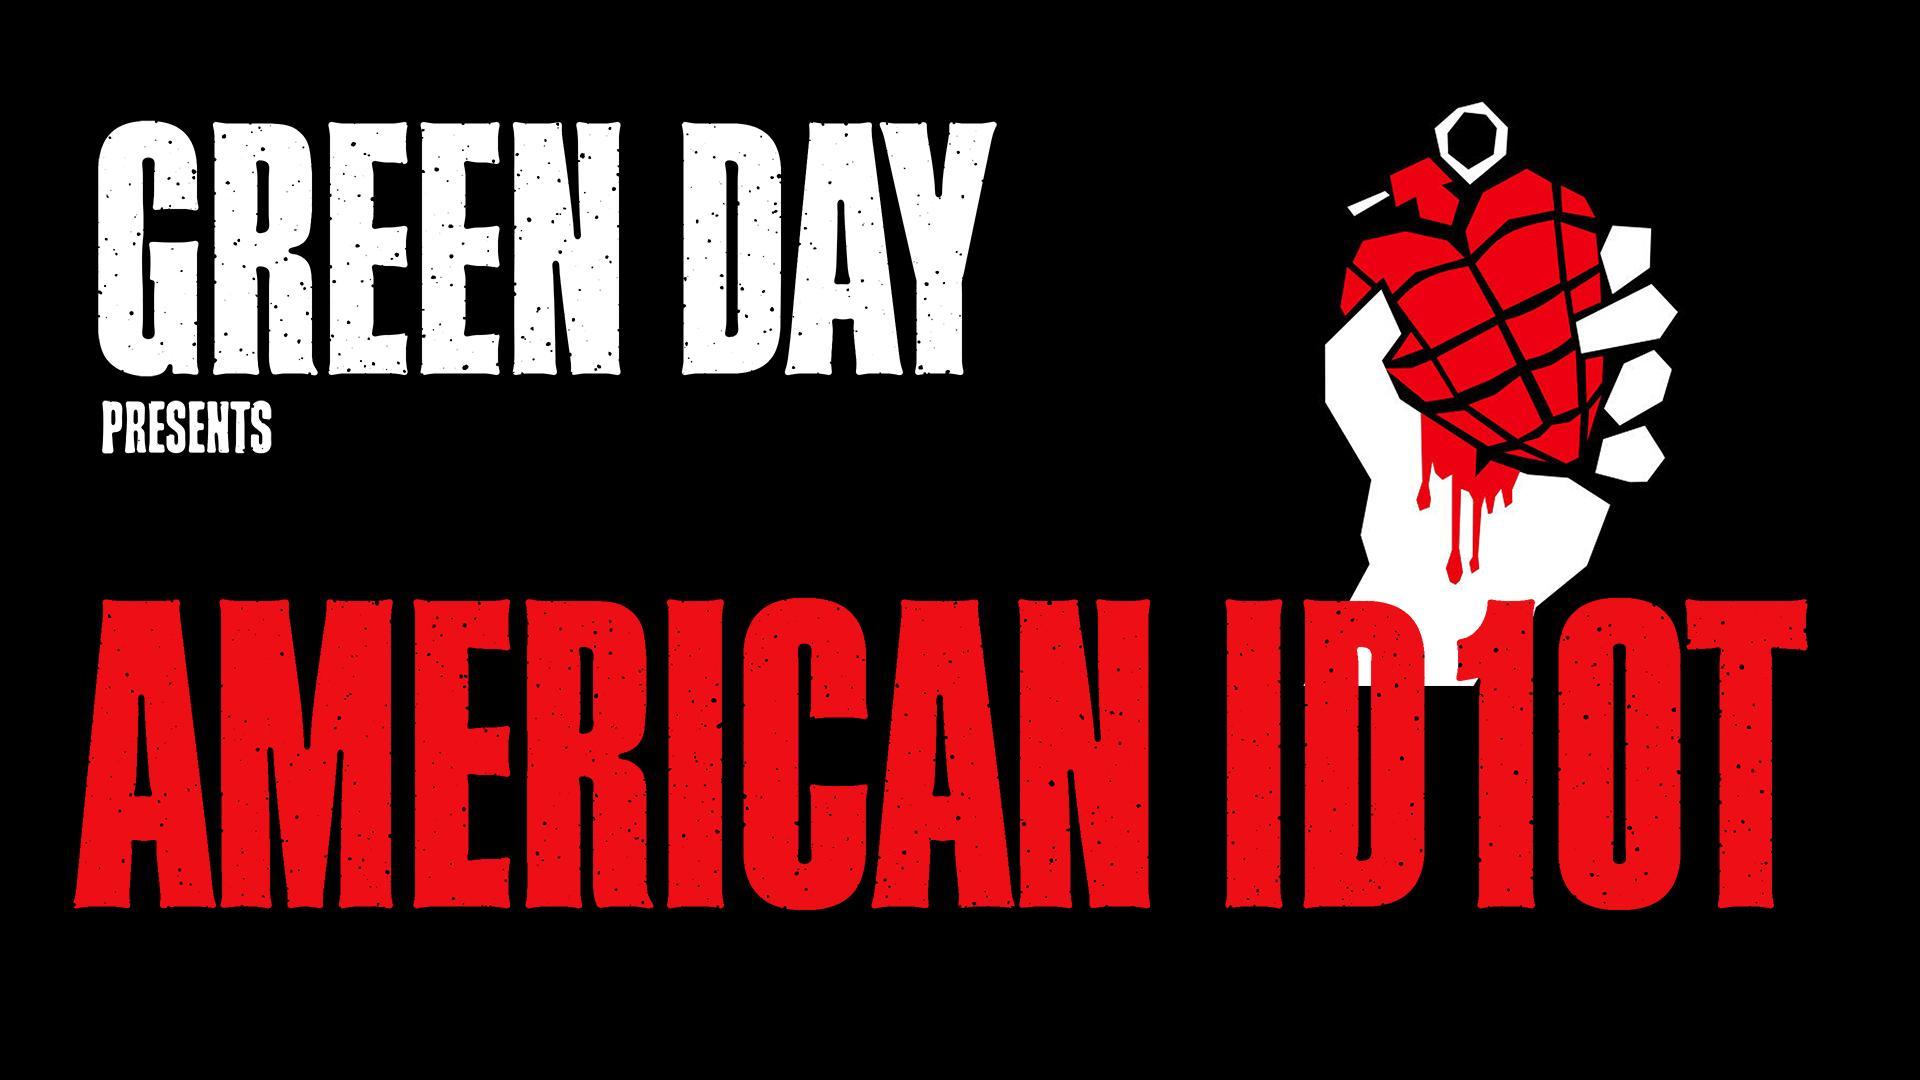 American Idiot 10th anniversary made by me. [1920x1080] 4K available